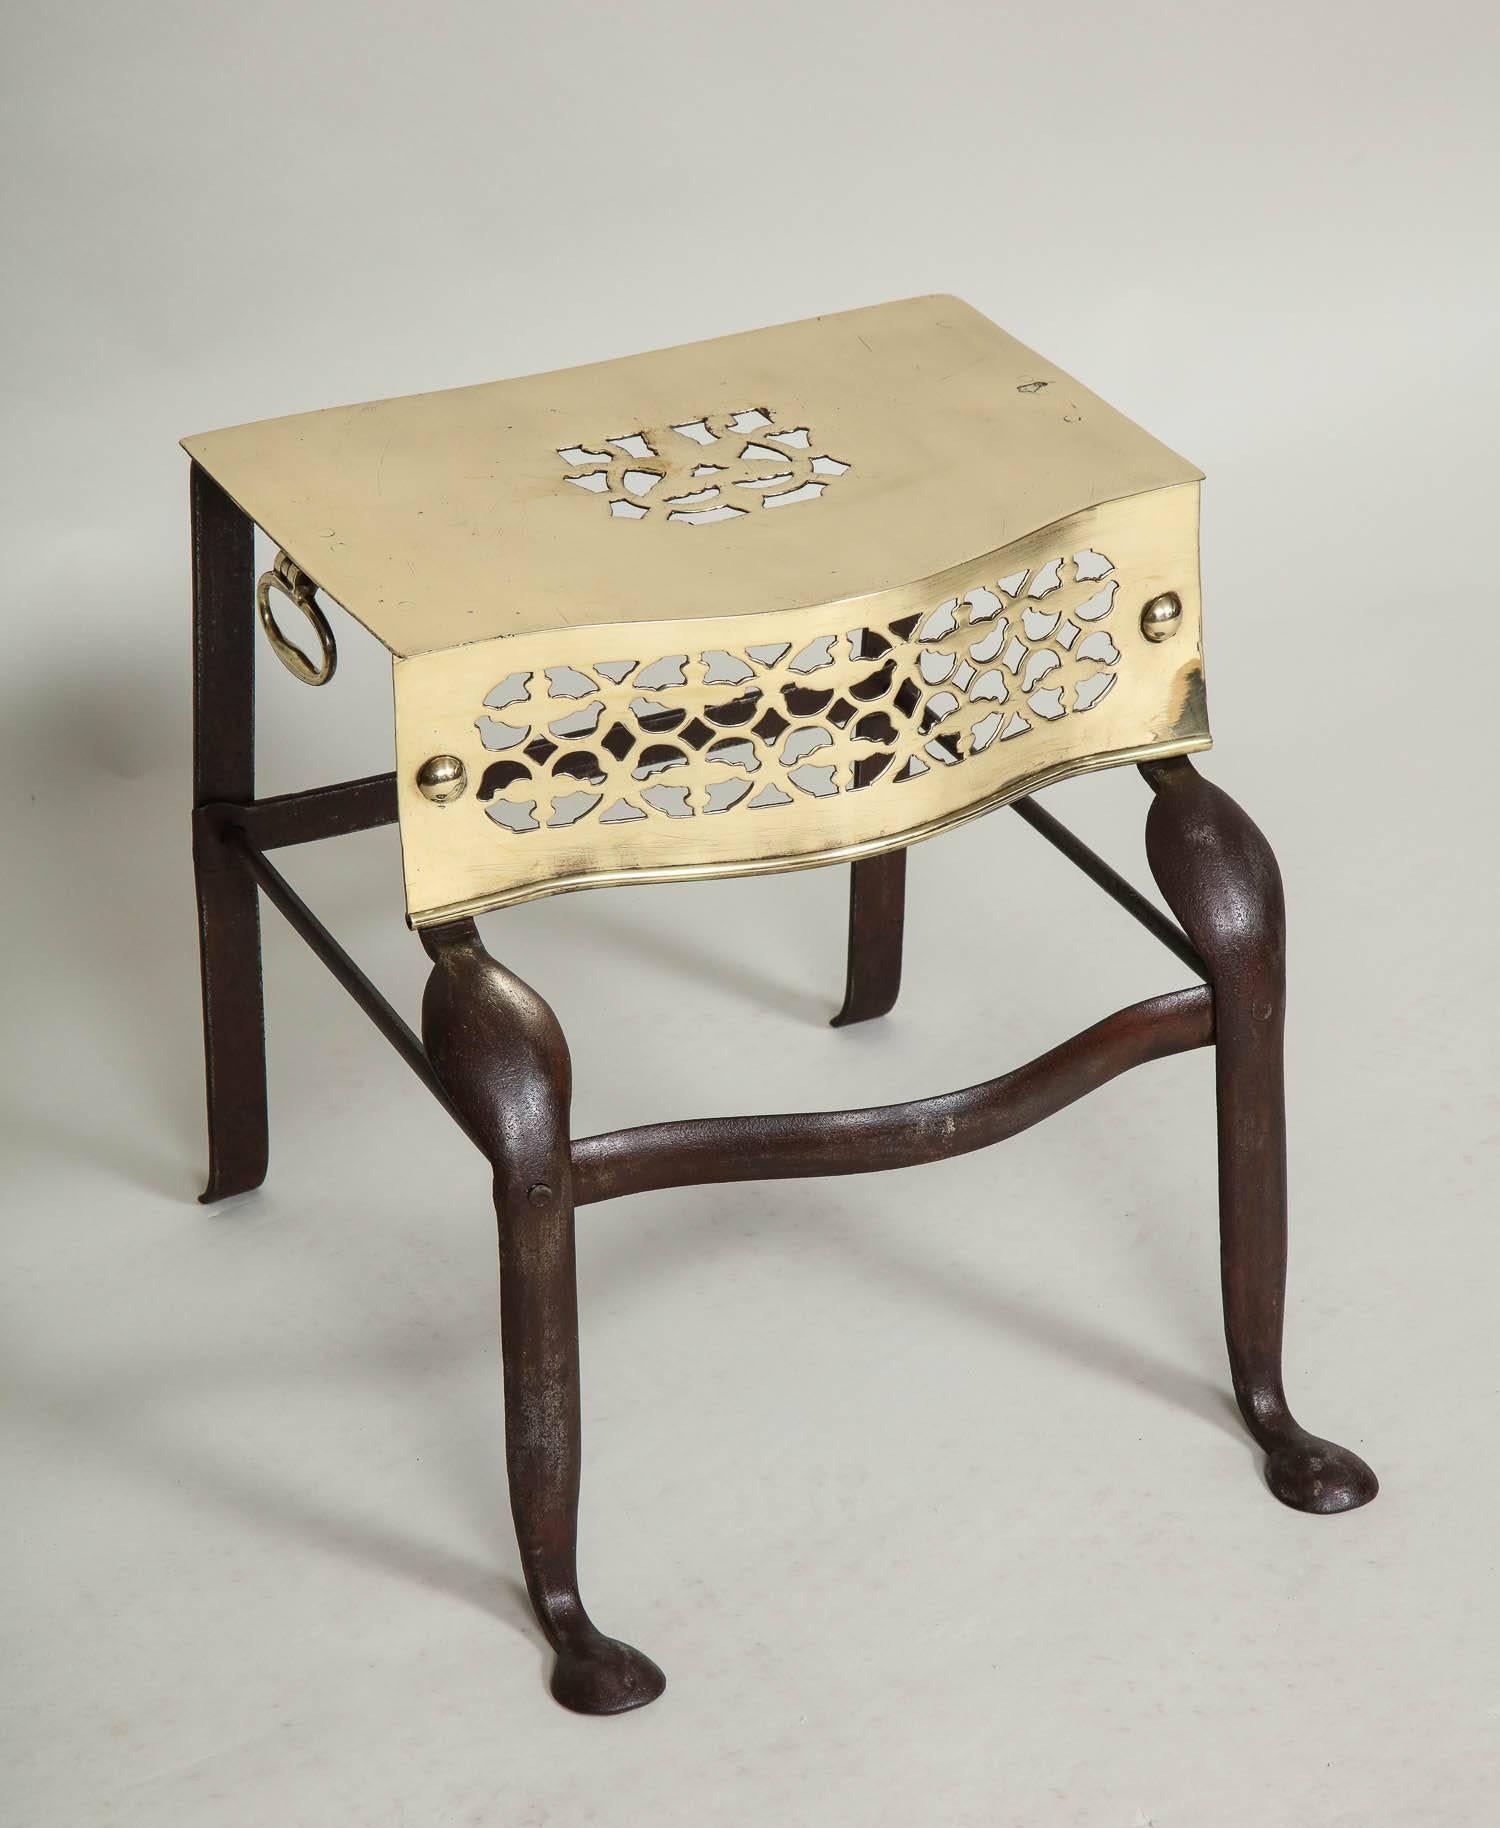 Fine George III period trivet having pierced brass top, frieze and handles over gunmetal steel base, the front cabriole legs ending in penny feet.